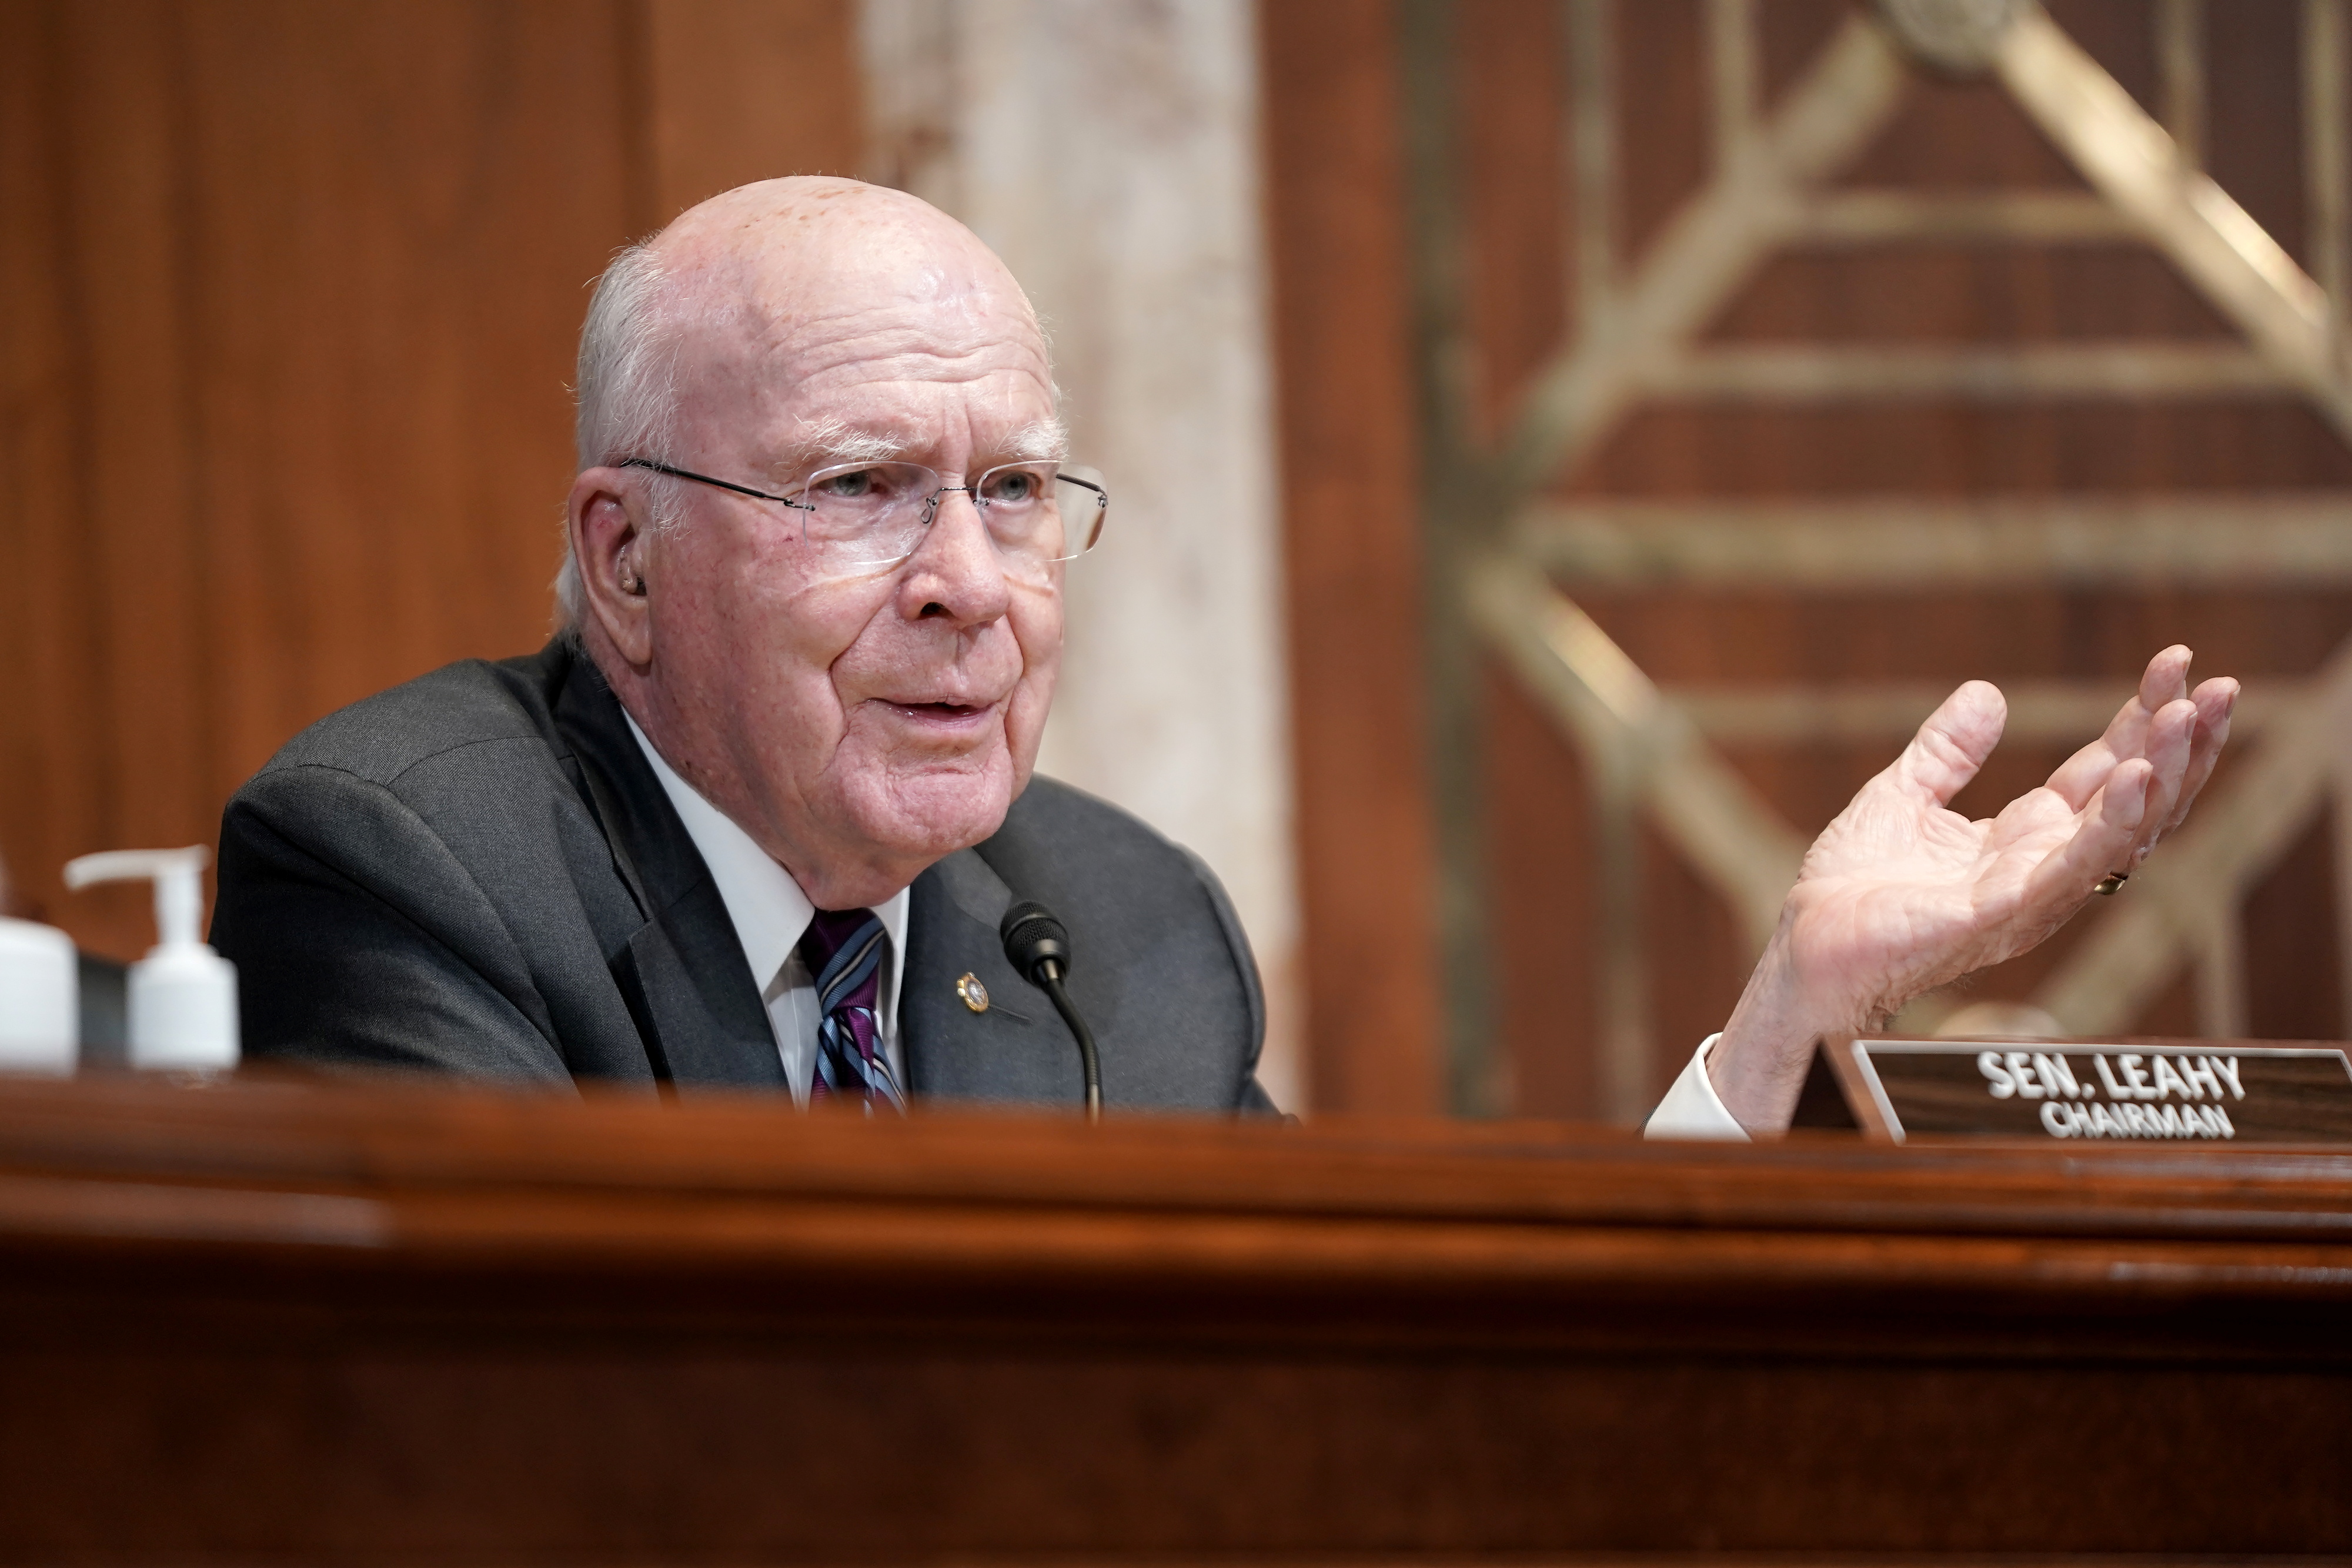 Senator Patrick Leahy (D-VT) questions Treasury Secretary Janet Yellen during the Senate Appropriations Subcommittee hearing to examine the FY22 budget request for the Treasury Department on Capitol Hill in Washington, DC, U.S., June 23, 2021.  Greg Nash/Pool via REUTERS/File Photo